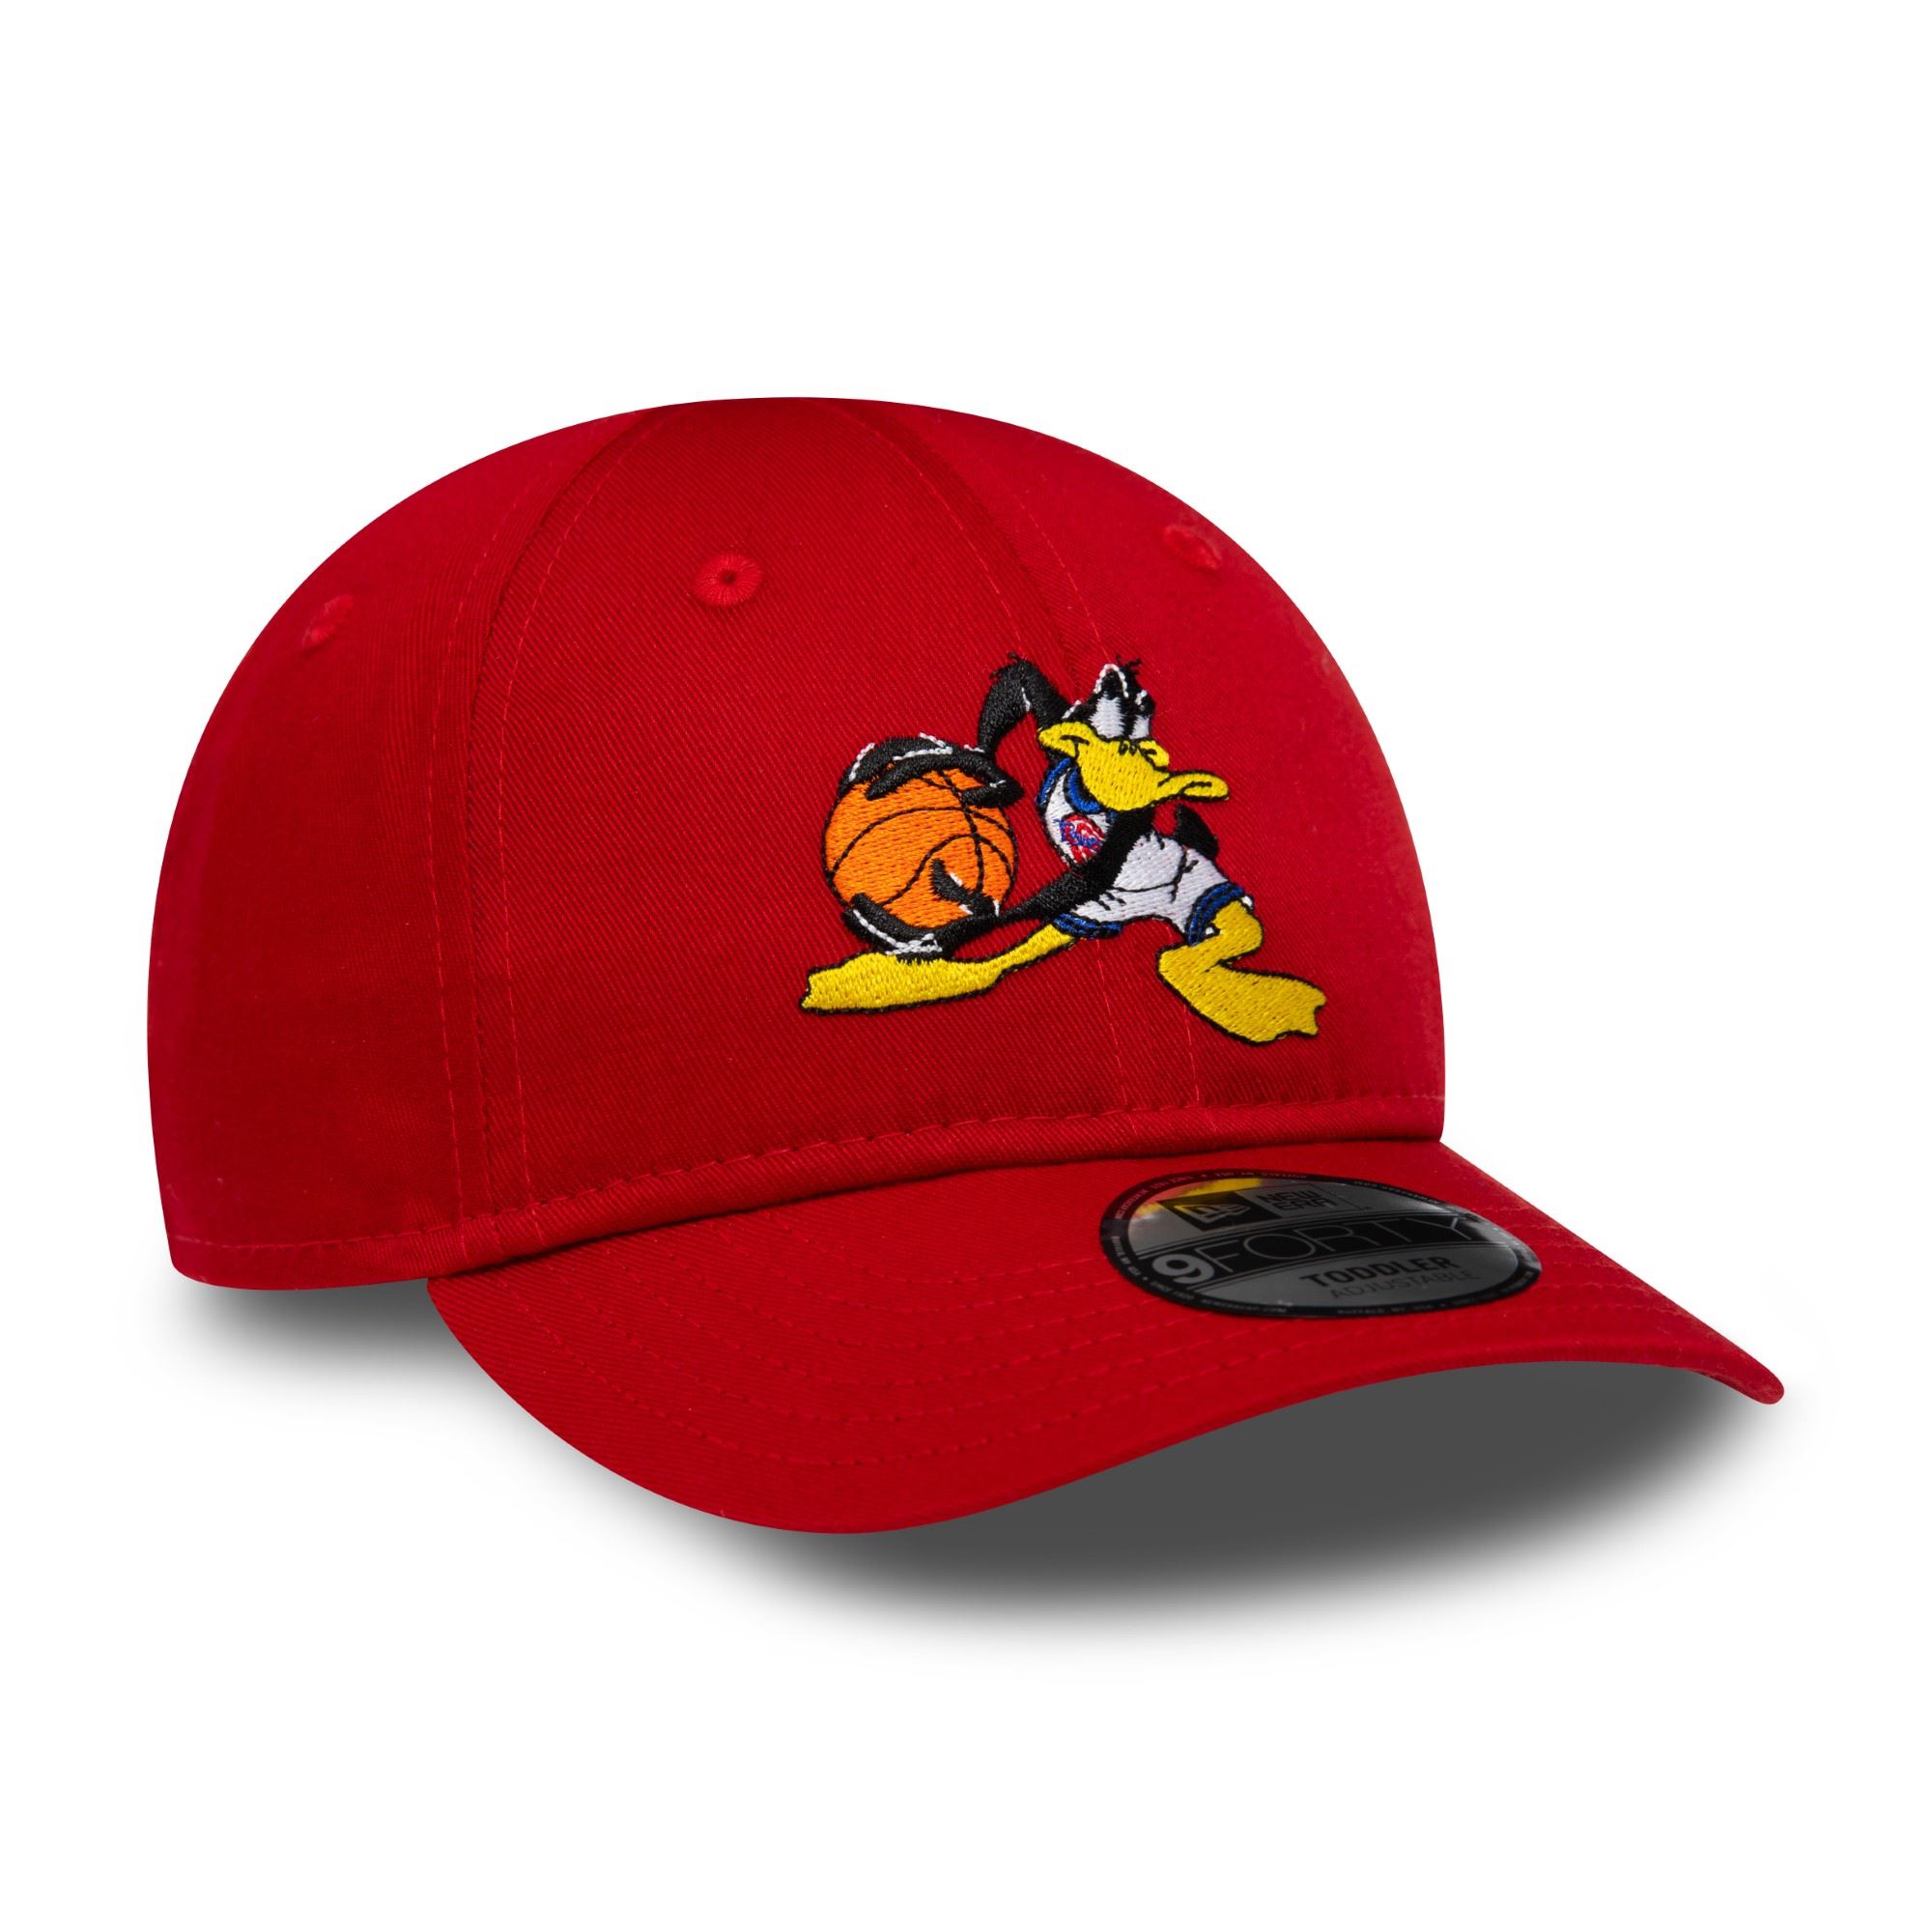 Daffy Duck Looney Tunes Red 9Forty Adjustable Toddler Cap New Era